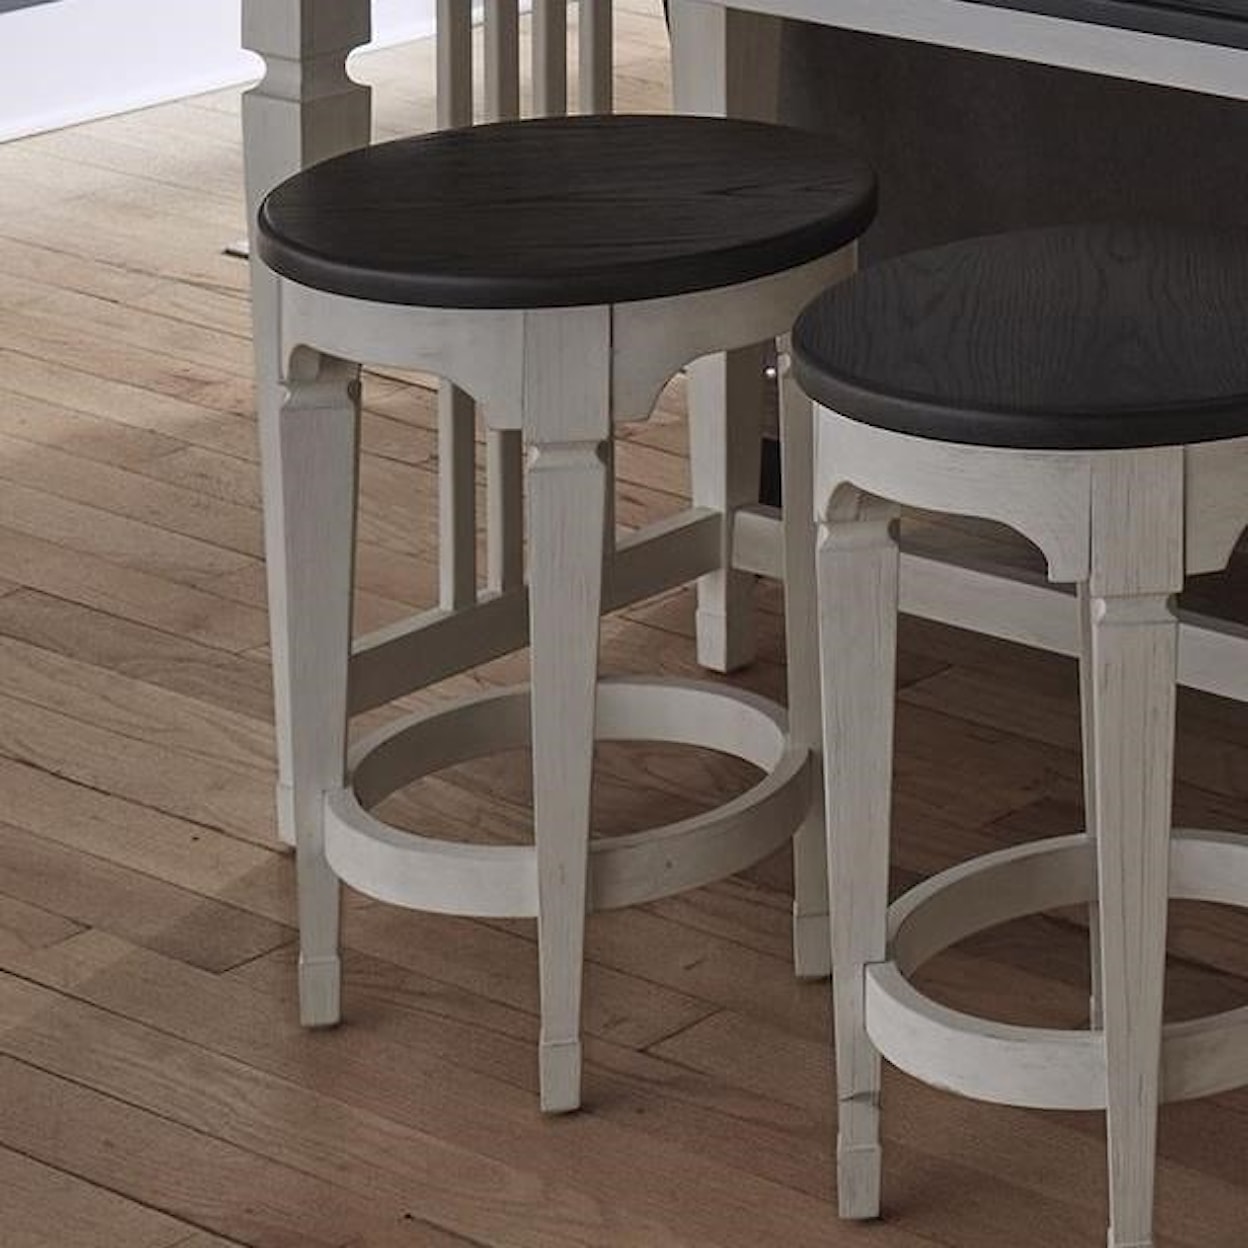 Freedom Furniture Allyson Park Console Stool